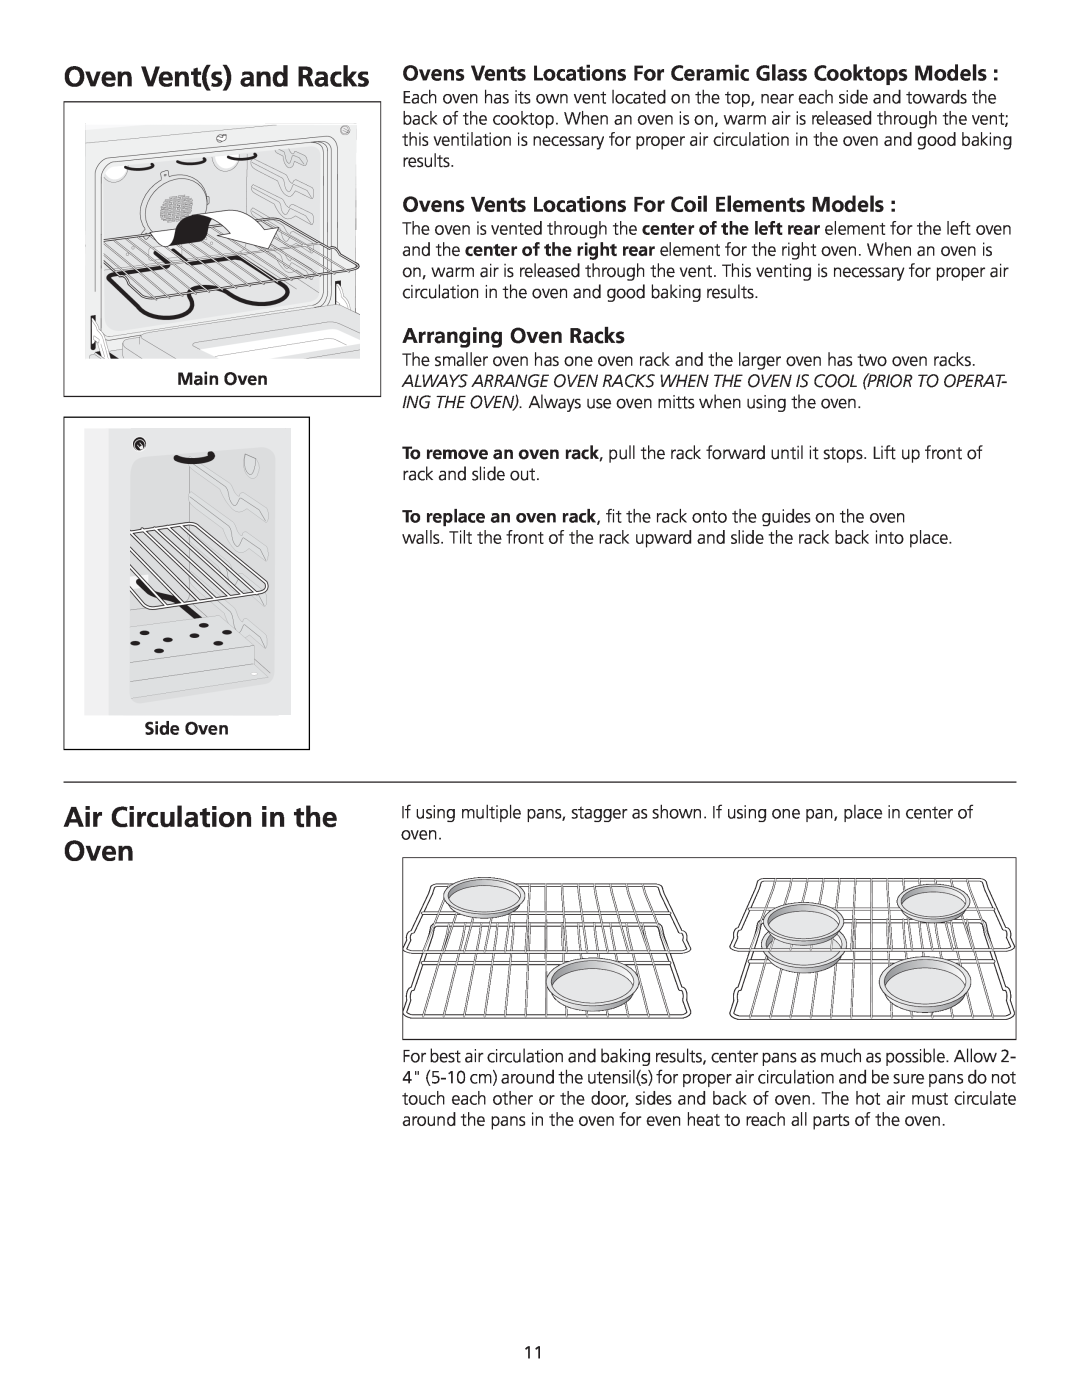 Frigidaire 318200710 Oven Vents and Racks, Air Circulation in the Oven, Ovens Vents Locations For Coil Elements Models 